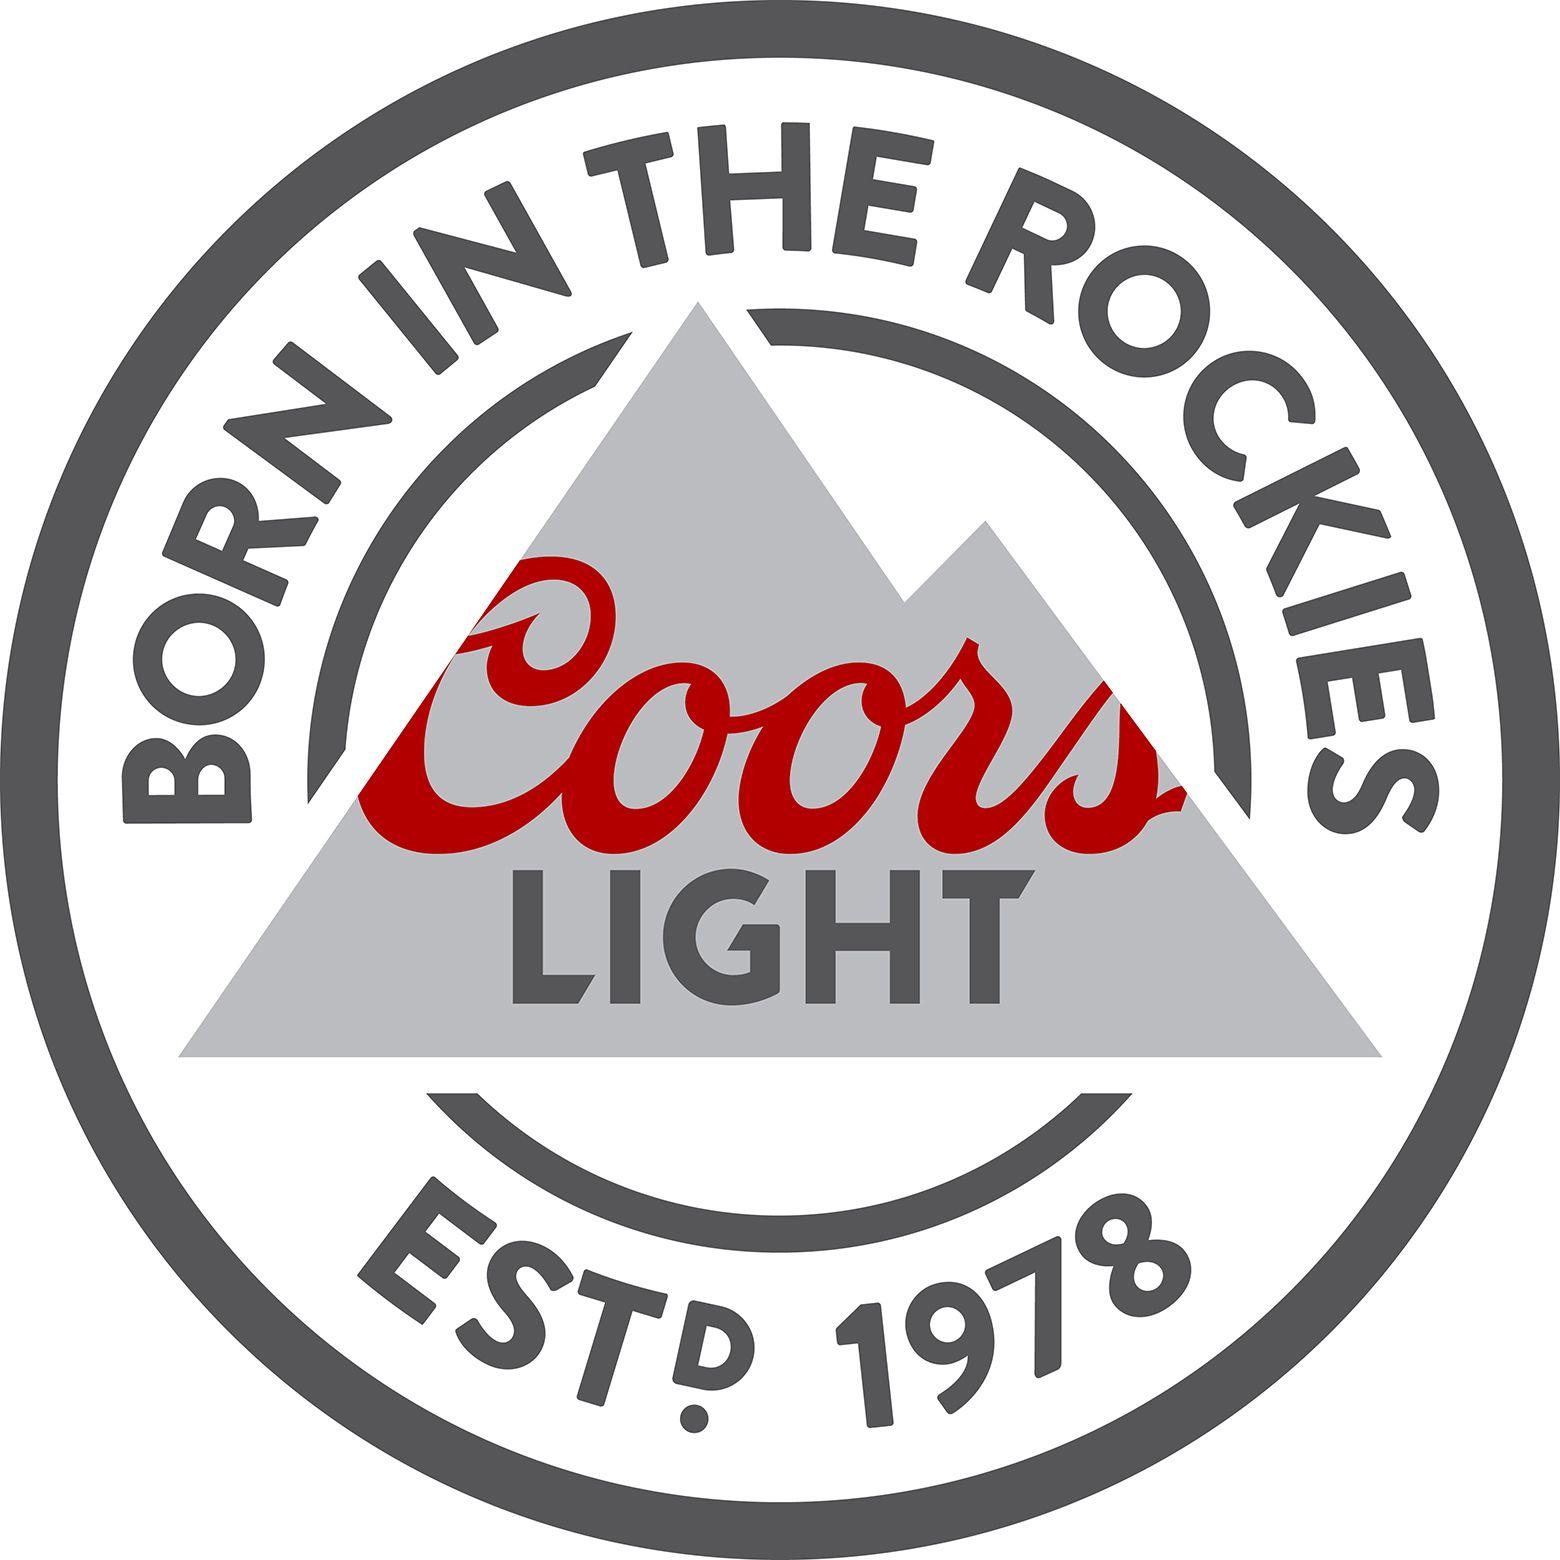 Coors Light Football Logo - Coors Light 96.5 The Mill Big Game Pregame Party At.5 THE MILL